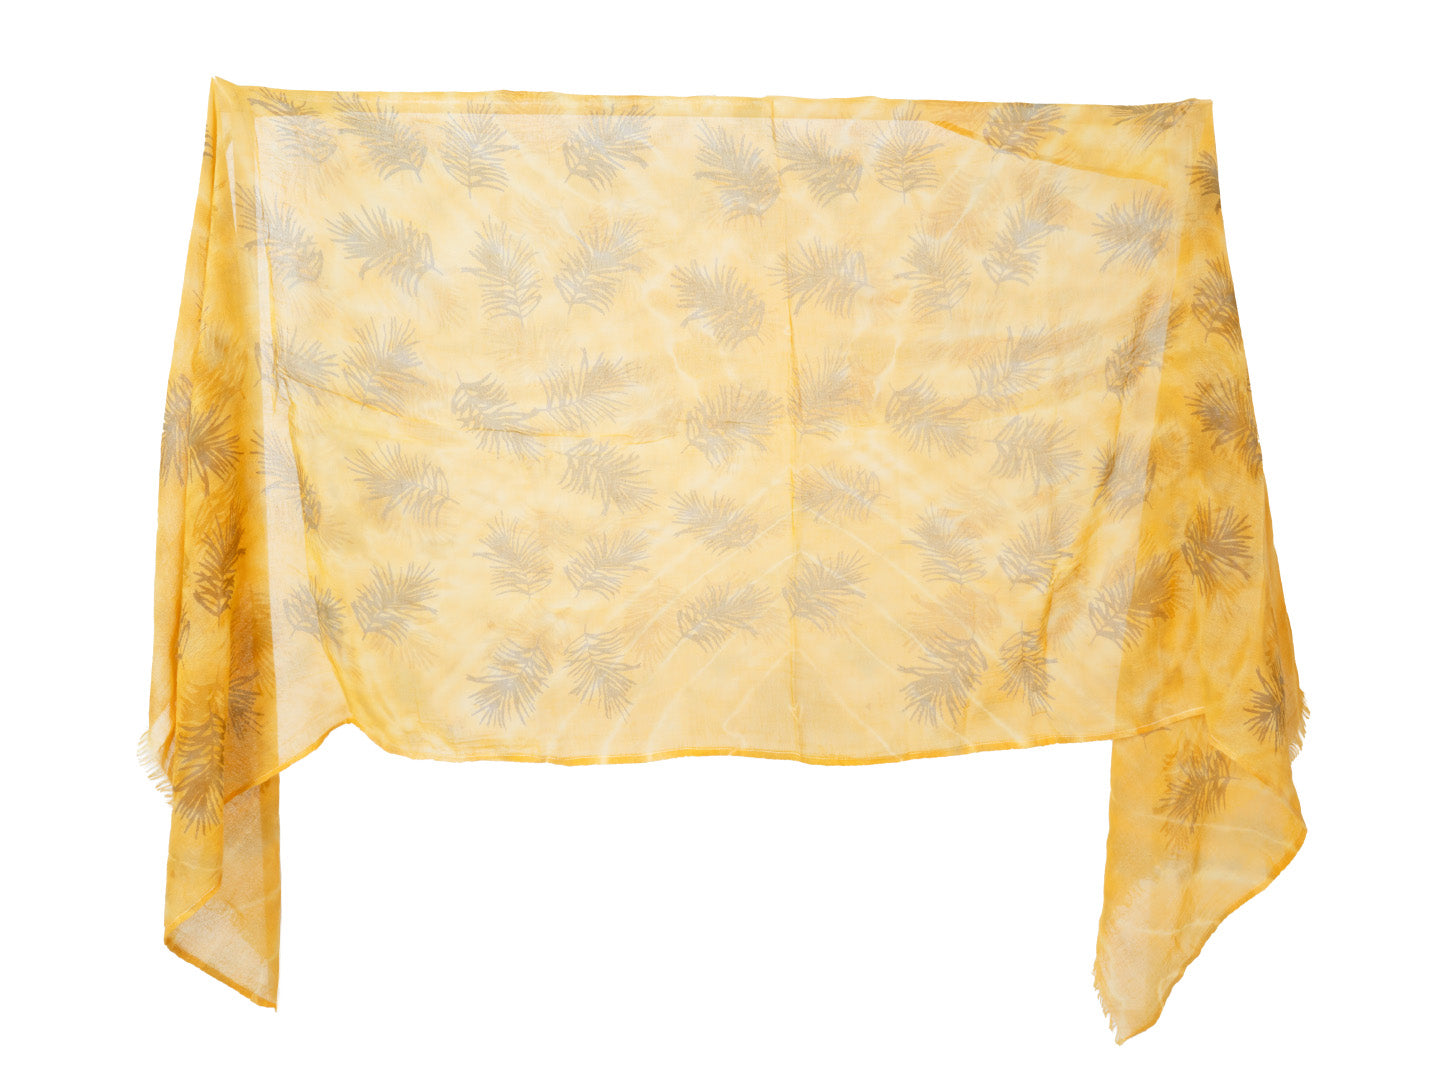 Natural yellow Mellow Gold Pear Handspun Handwoven Cotton Scarf & Shawls Patterned - CCCollections